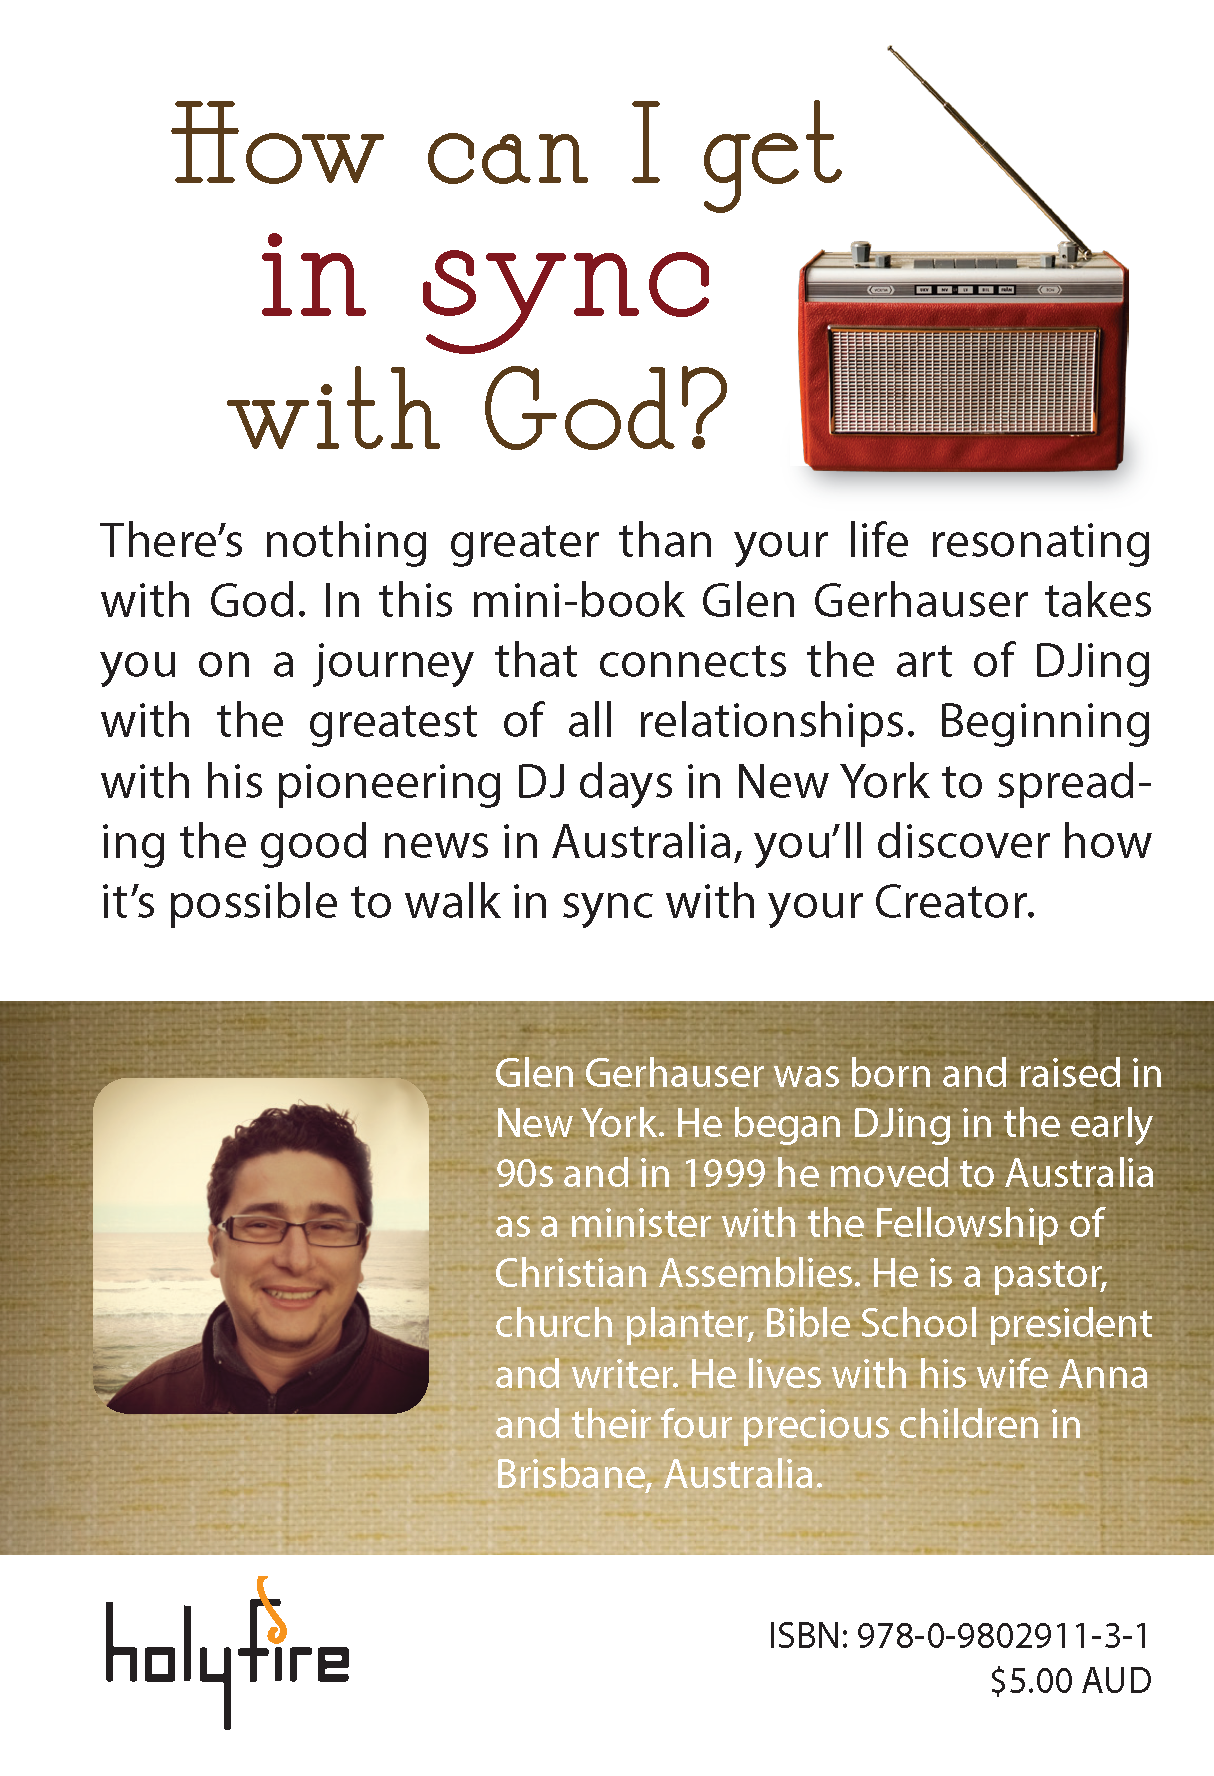 In Sync: Your Life Resonating with God - Part 1 (Digital Book)